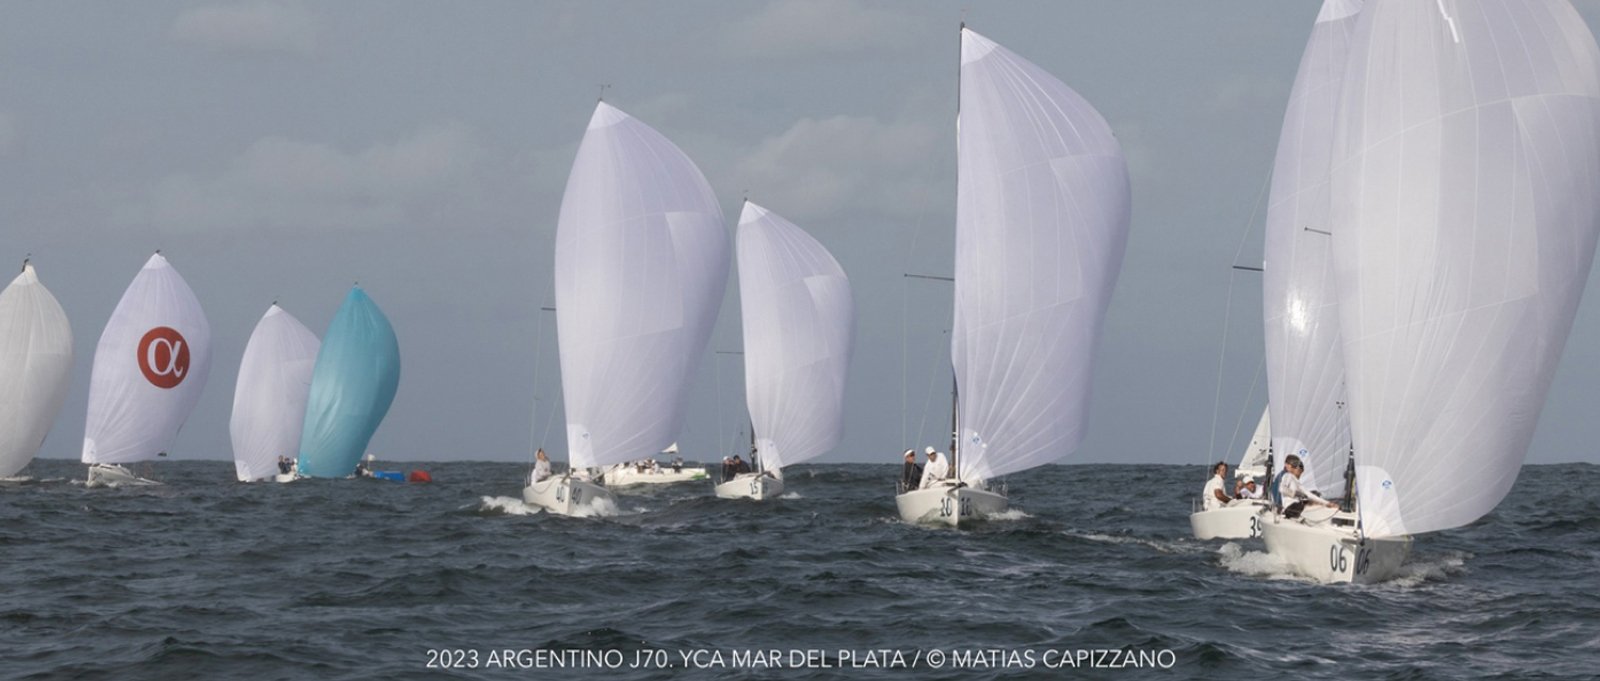 Mastering the art of Sailing into the wind